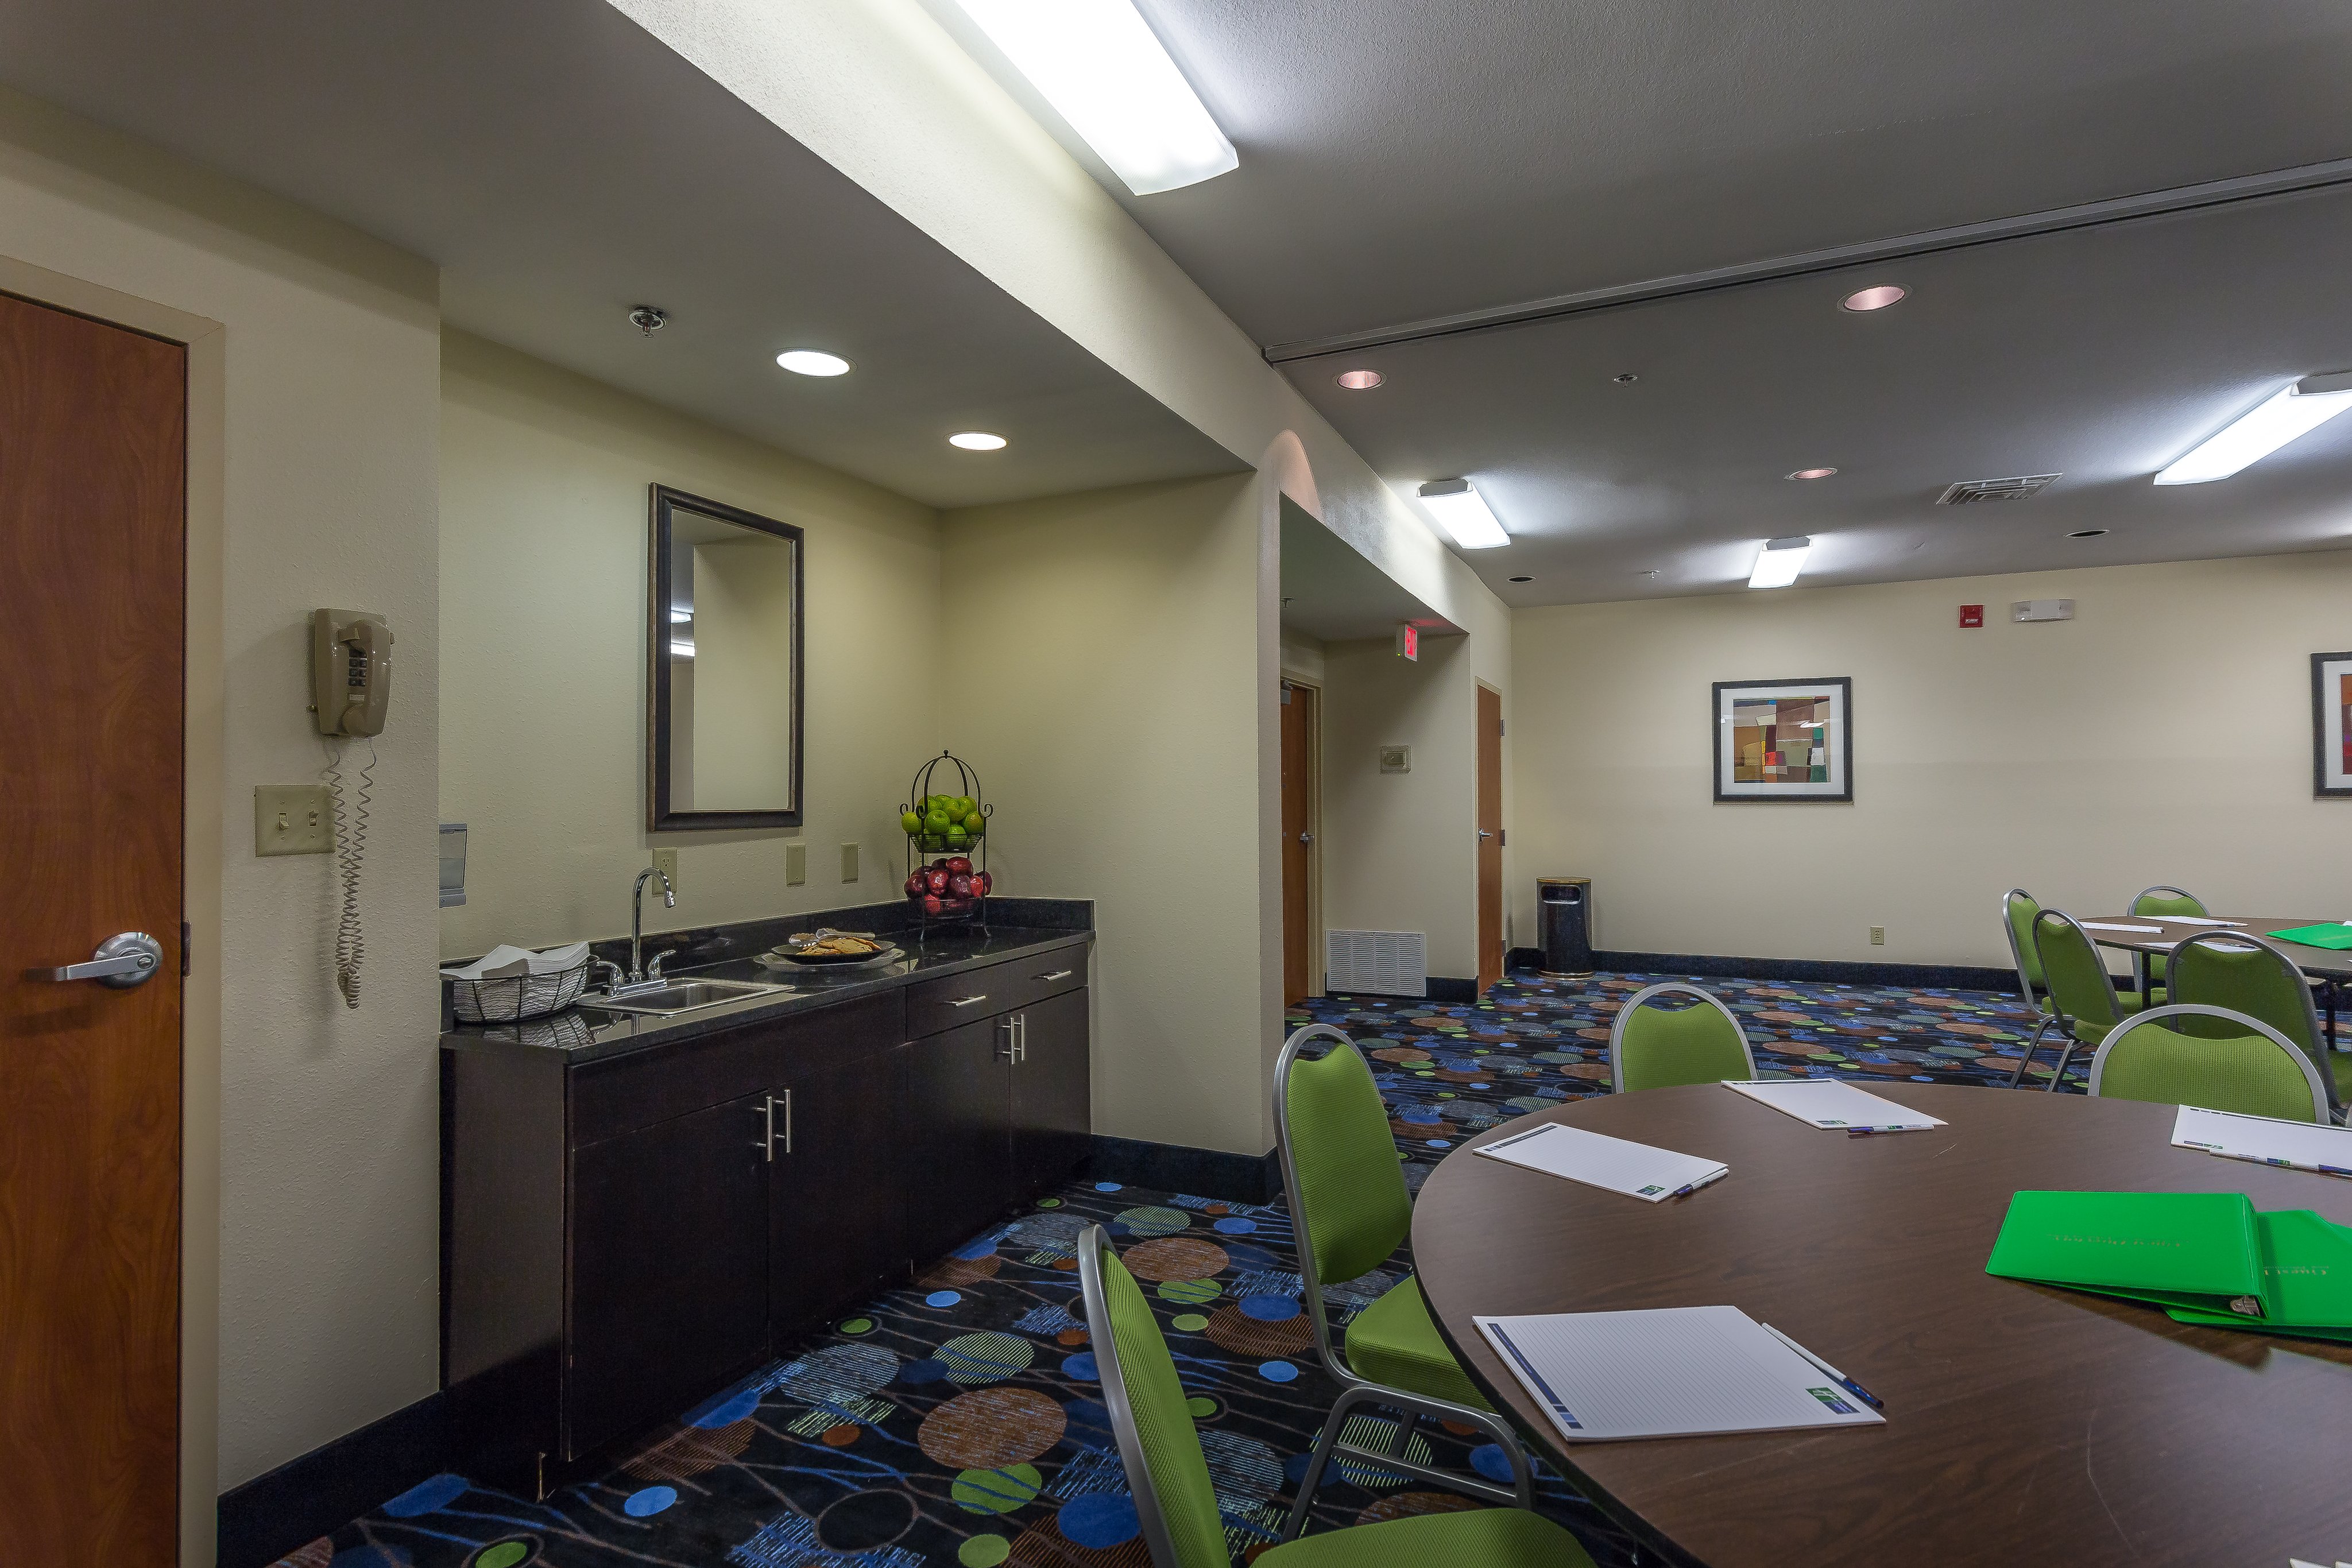 Are you in town for business? Reserve our conference room!